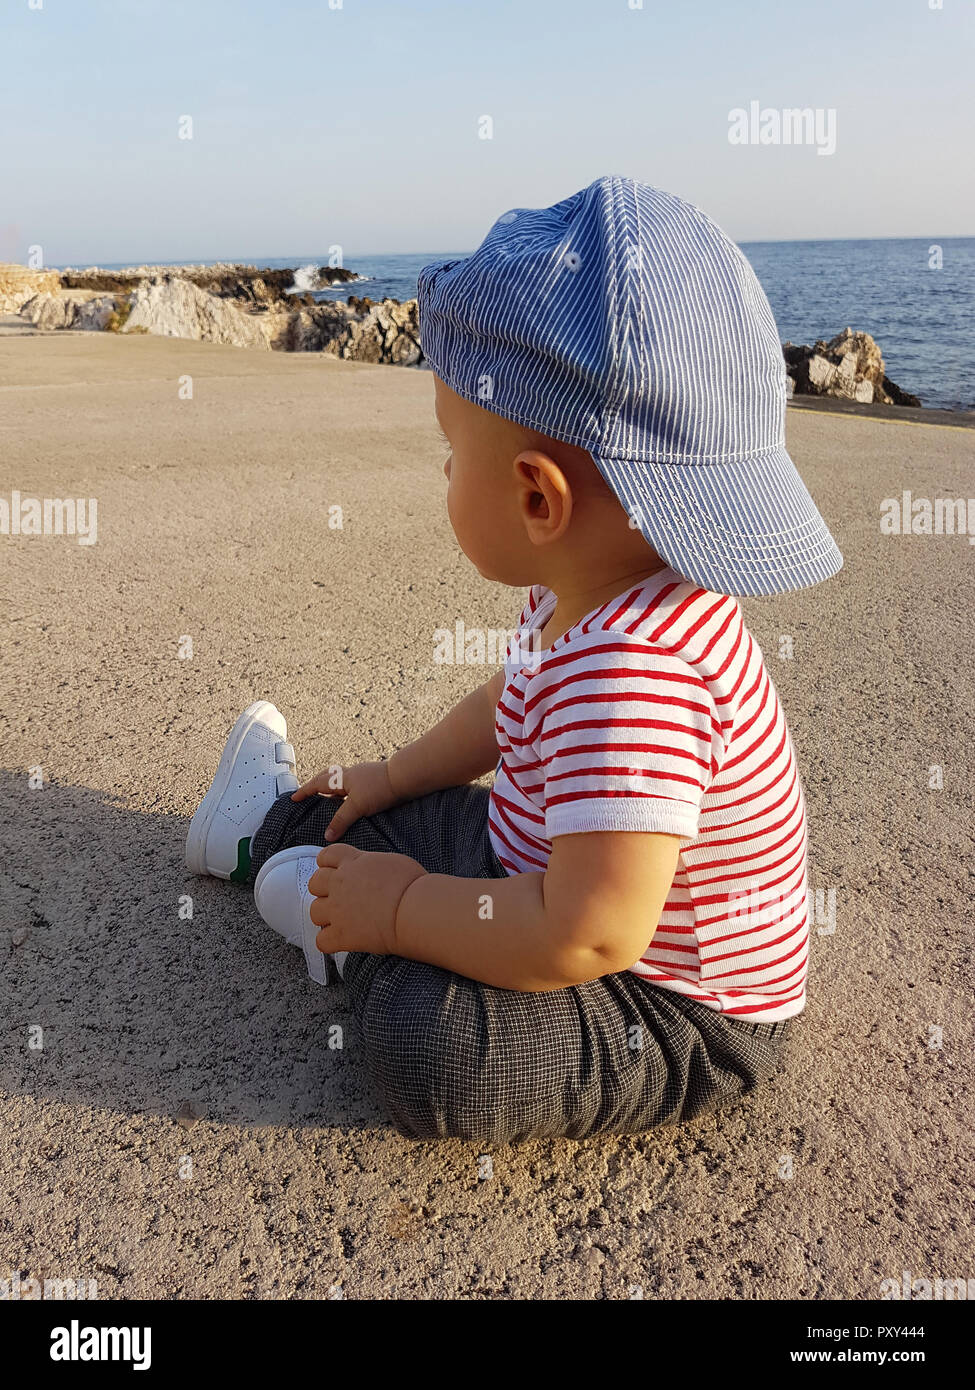 Cute Baby Boy One Year Wearing A Cap Backwards And Striped Clothes, Close Up Portrait. Mediterranean Sea In The Background Stock Photo